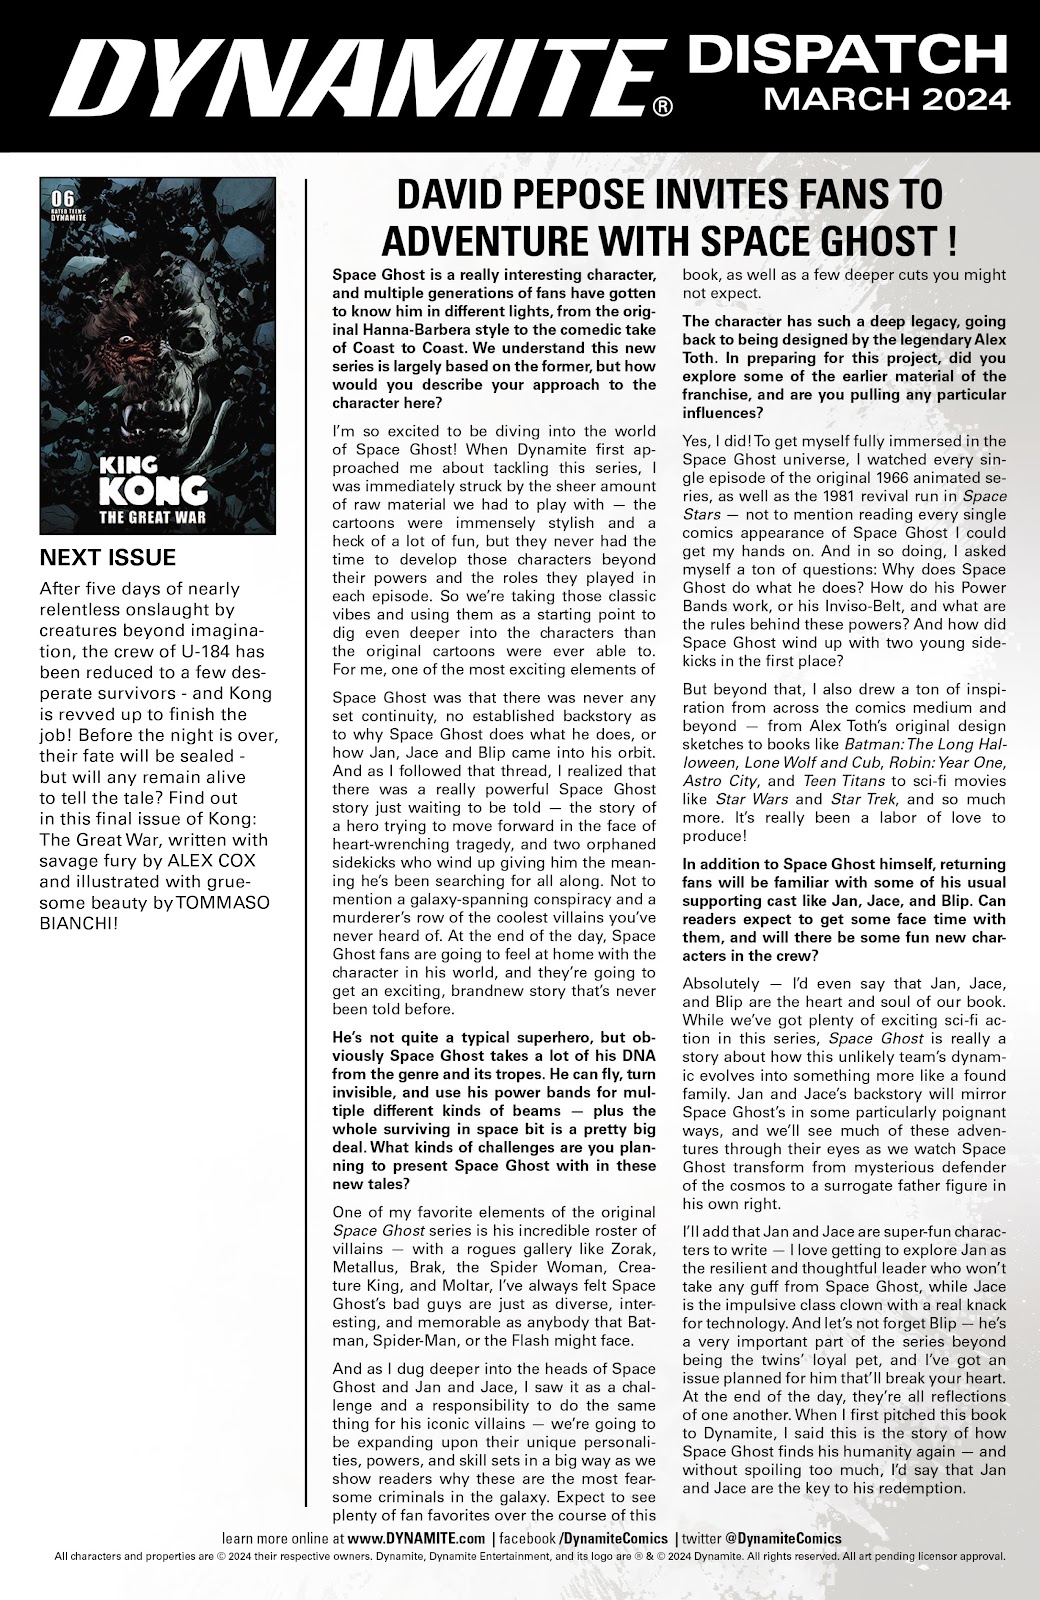 Kong: The Great War issue 5 - Page 24